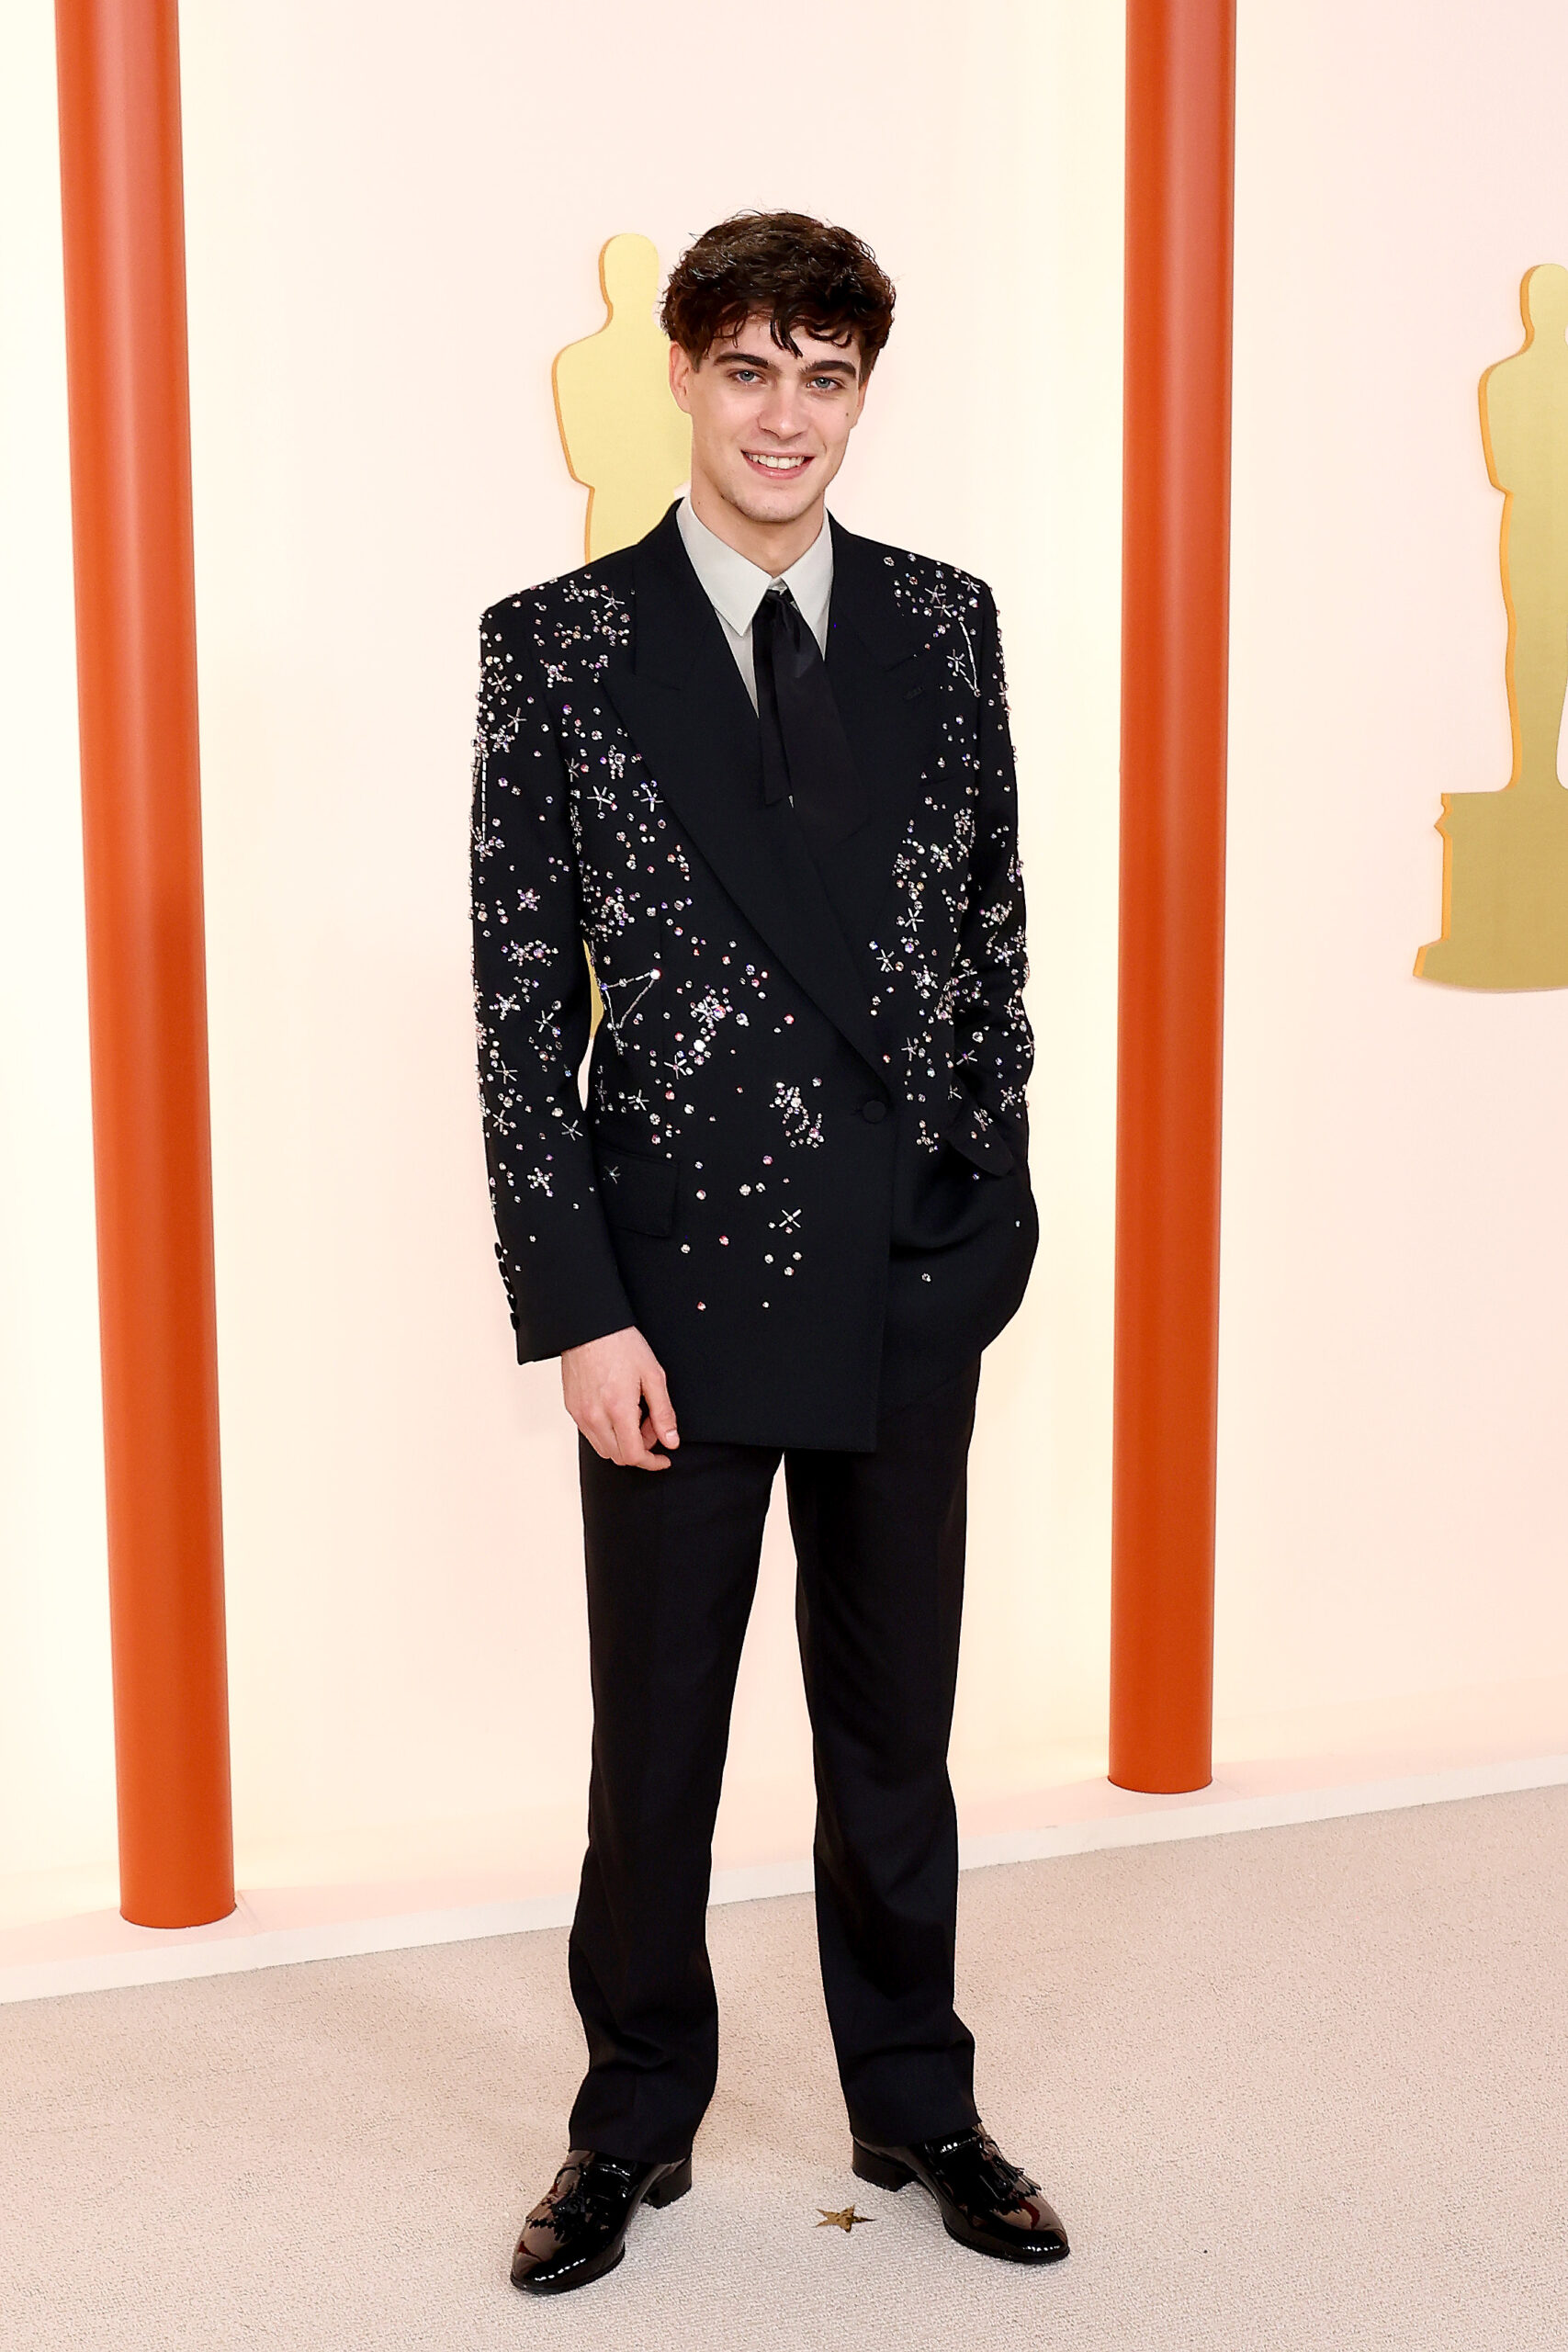 Lorenzo Zurzolo wore a custom Gucci black crystal-embroidered tuxedo, beige evening shirt, black tie, and black leather lace-ups.